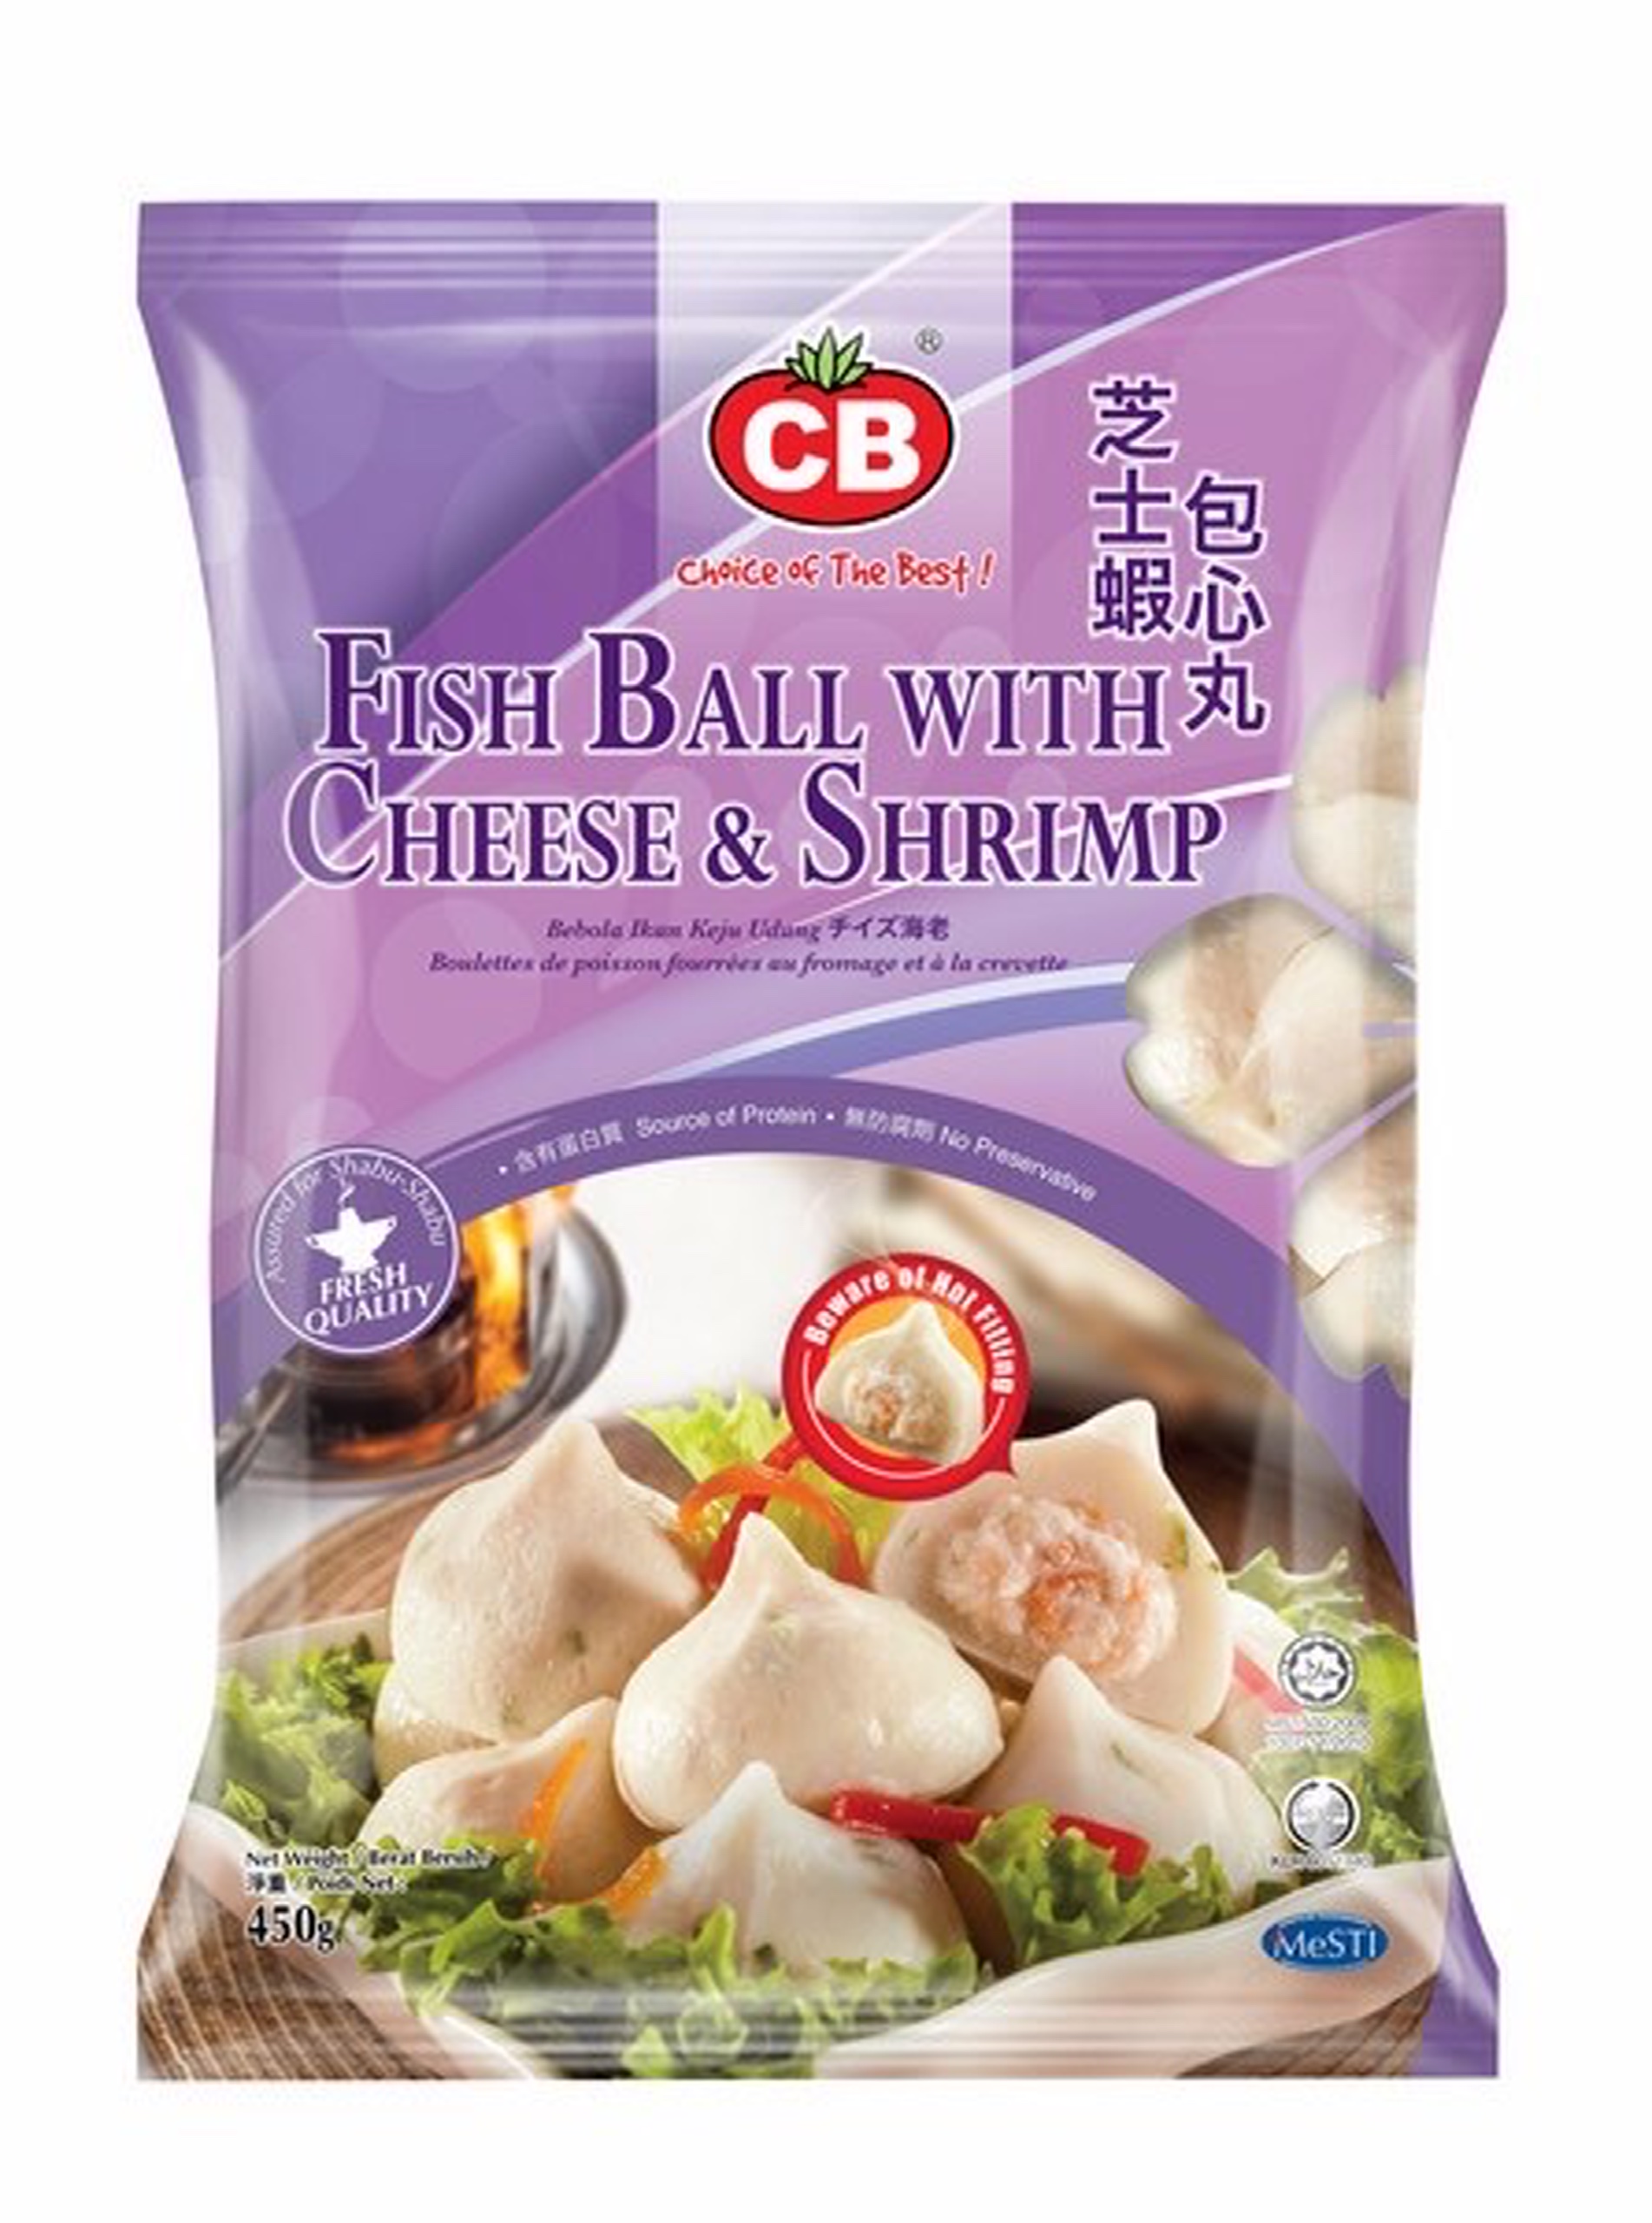 CB Fish Ball With Cheese & Shrimp (450g)